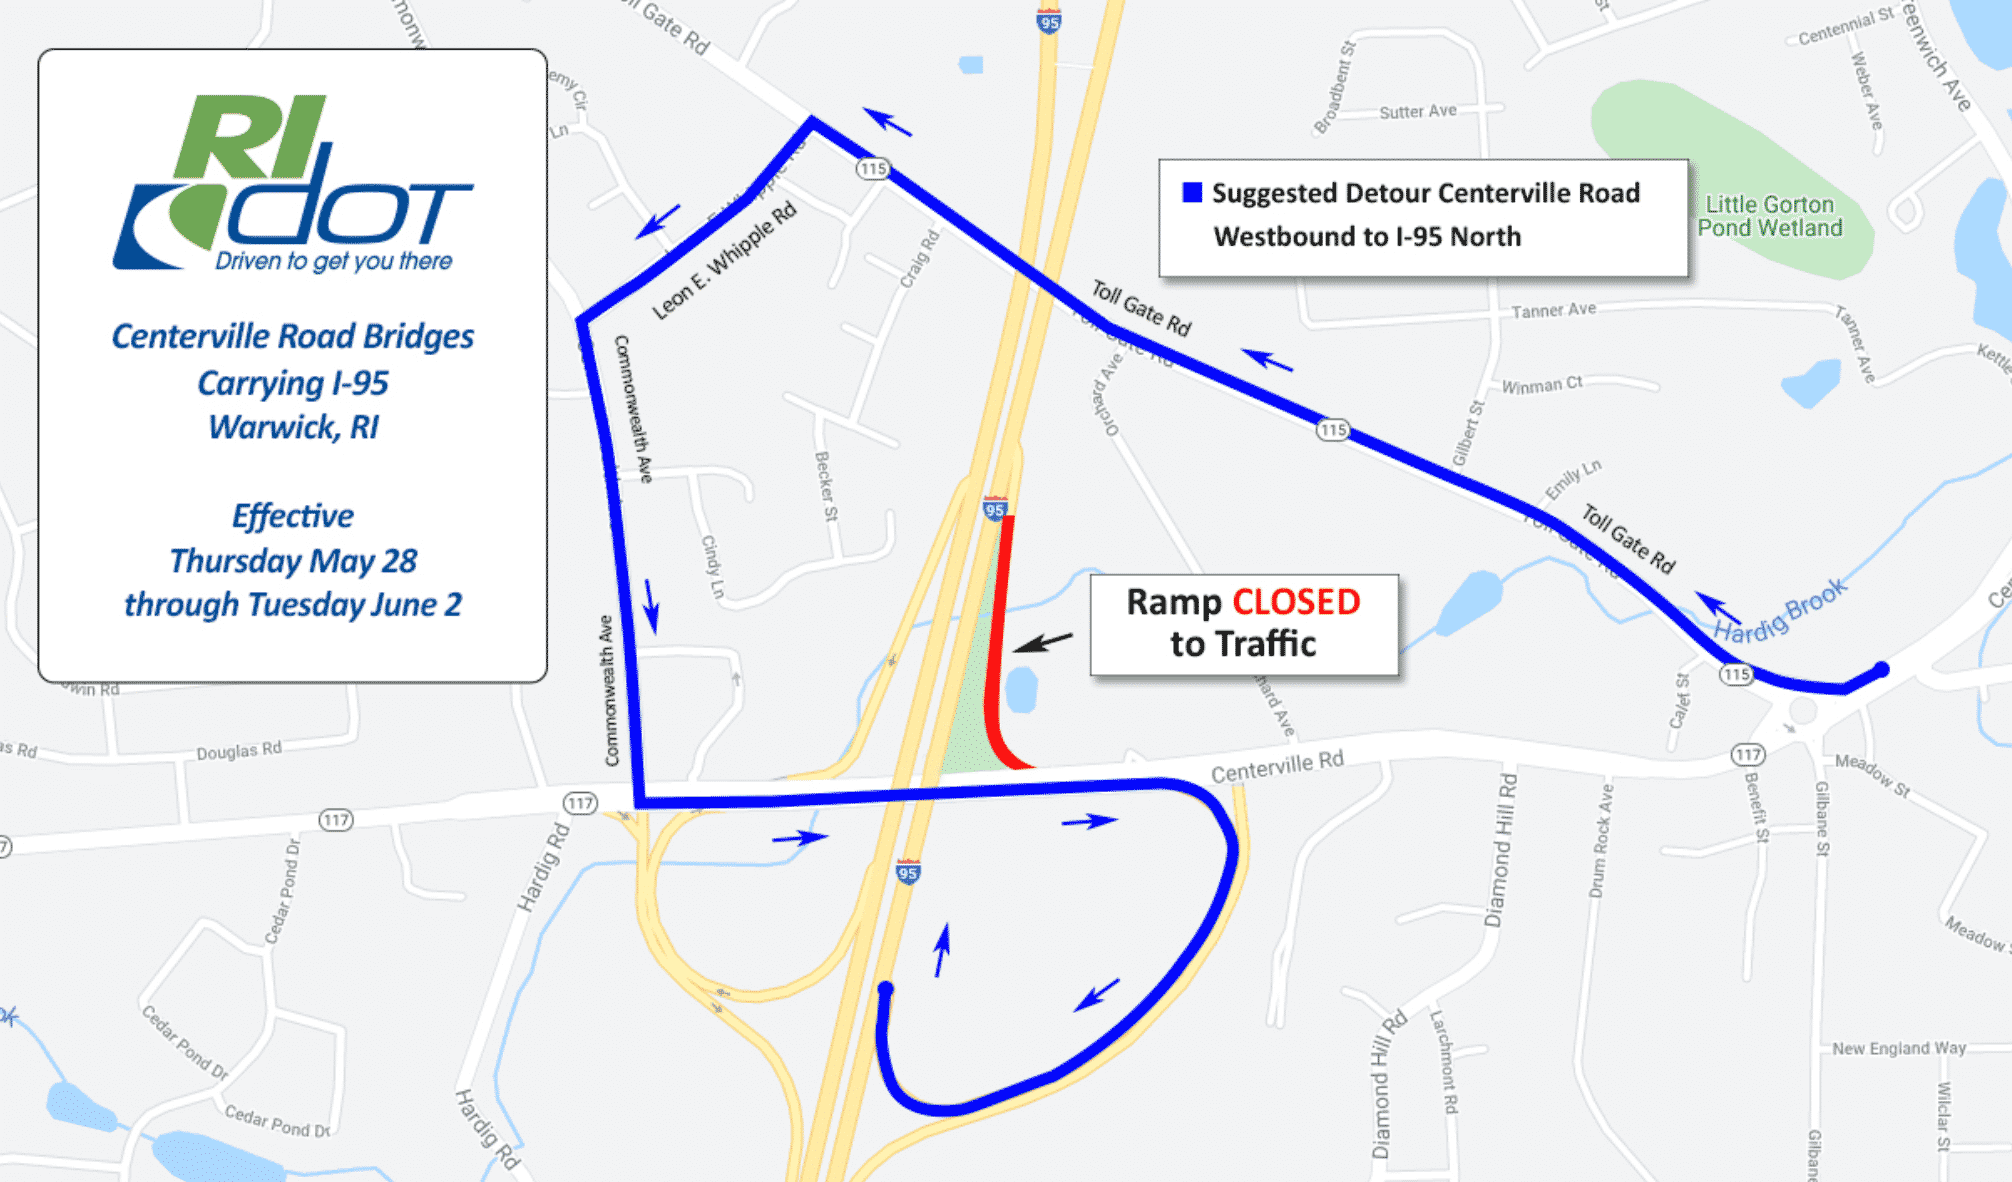 [CREDIT: RIDOT] New Toll Gate & Centerville Road bridges on Rte. 95 near Exit 10 will be moved into place starting May 28 as traffic is detoured.